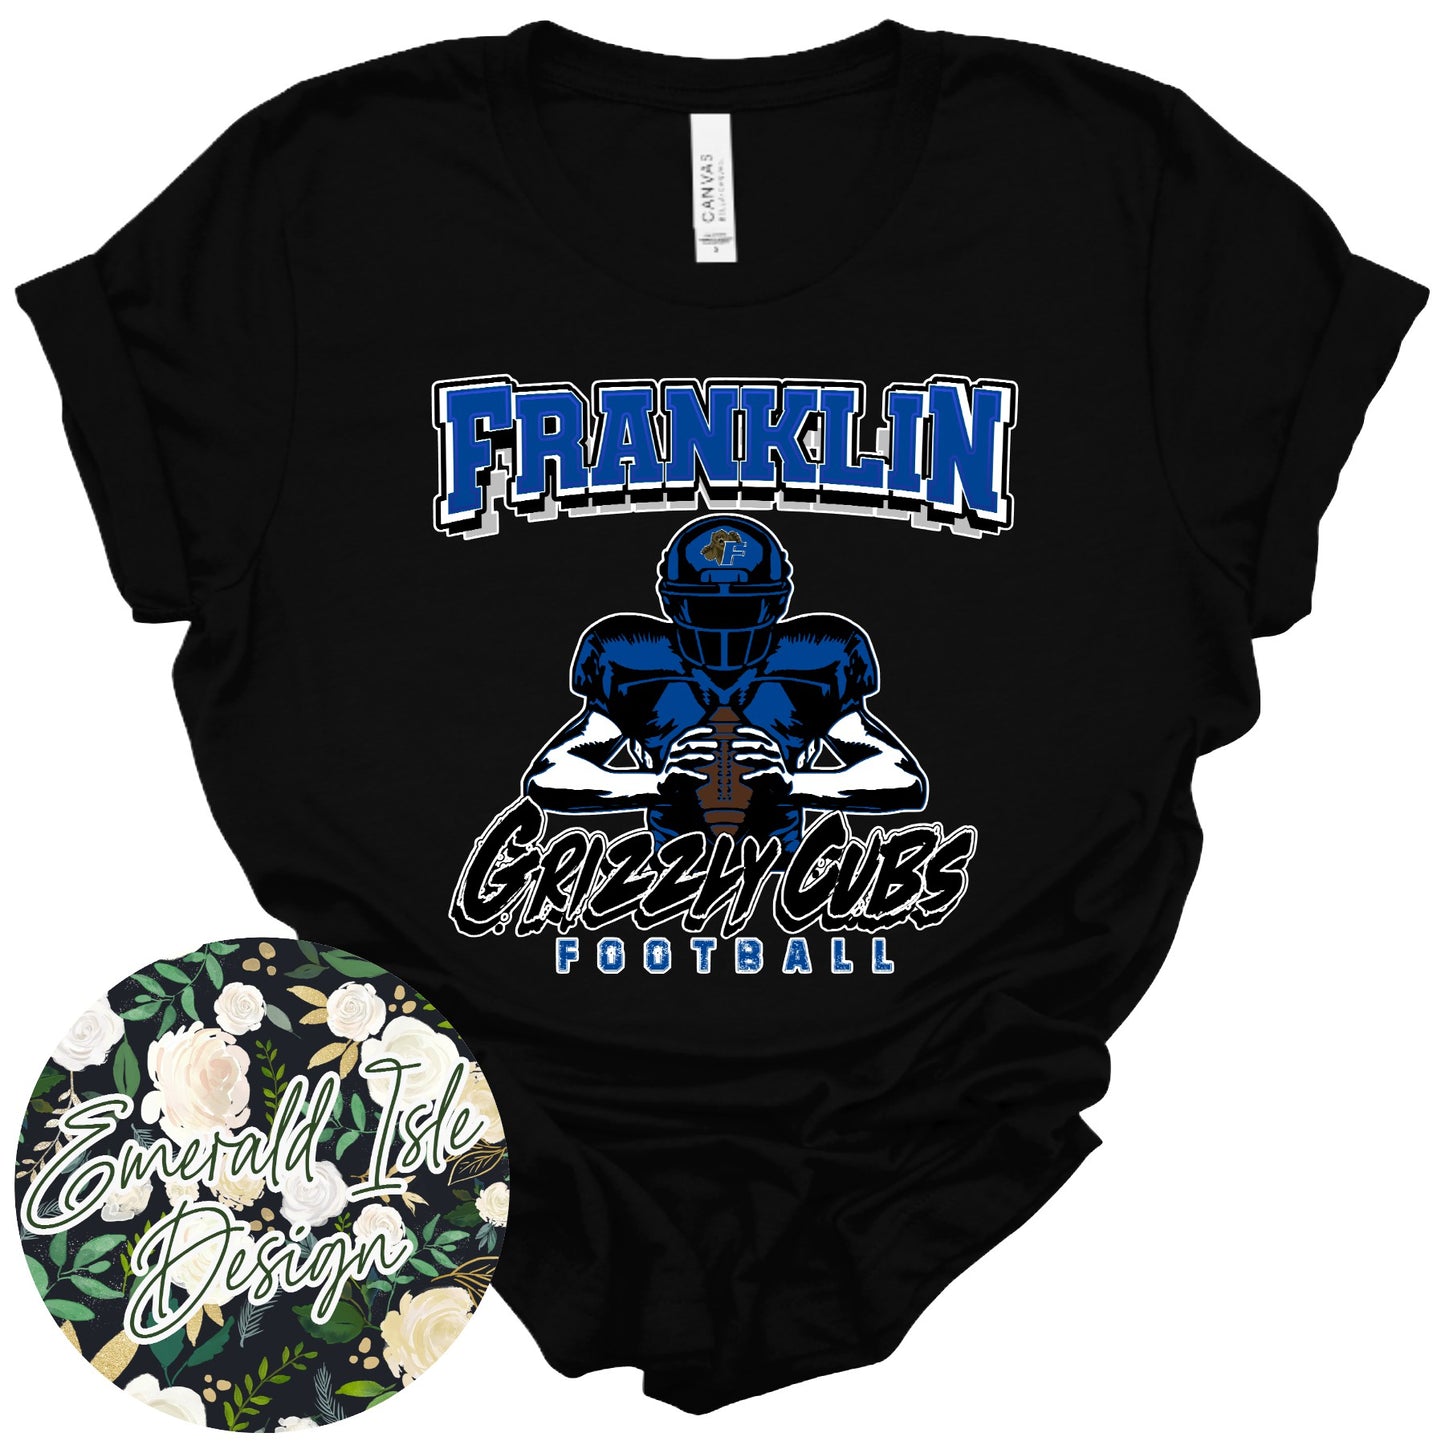 Franklin Grizzly Cubs Football Design